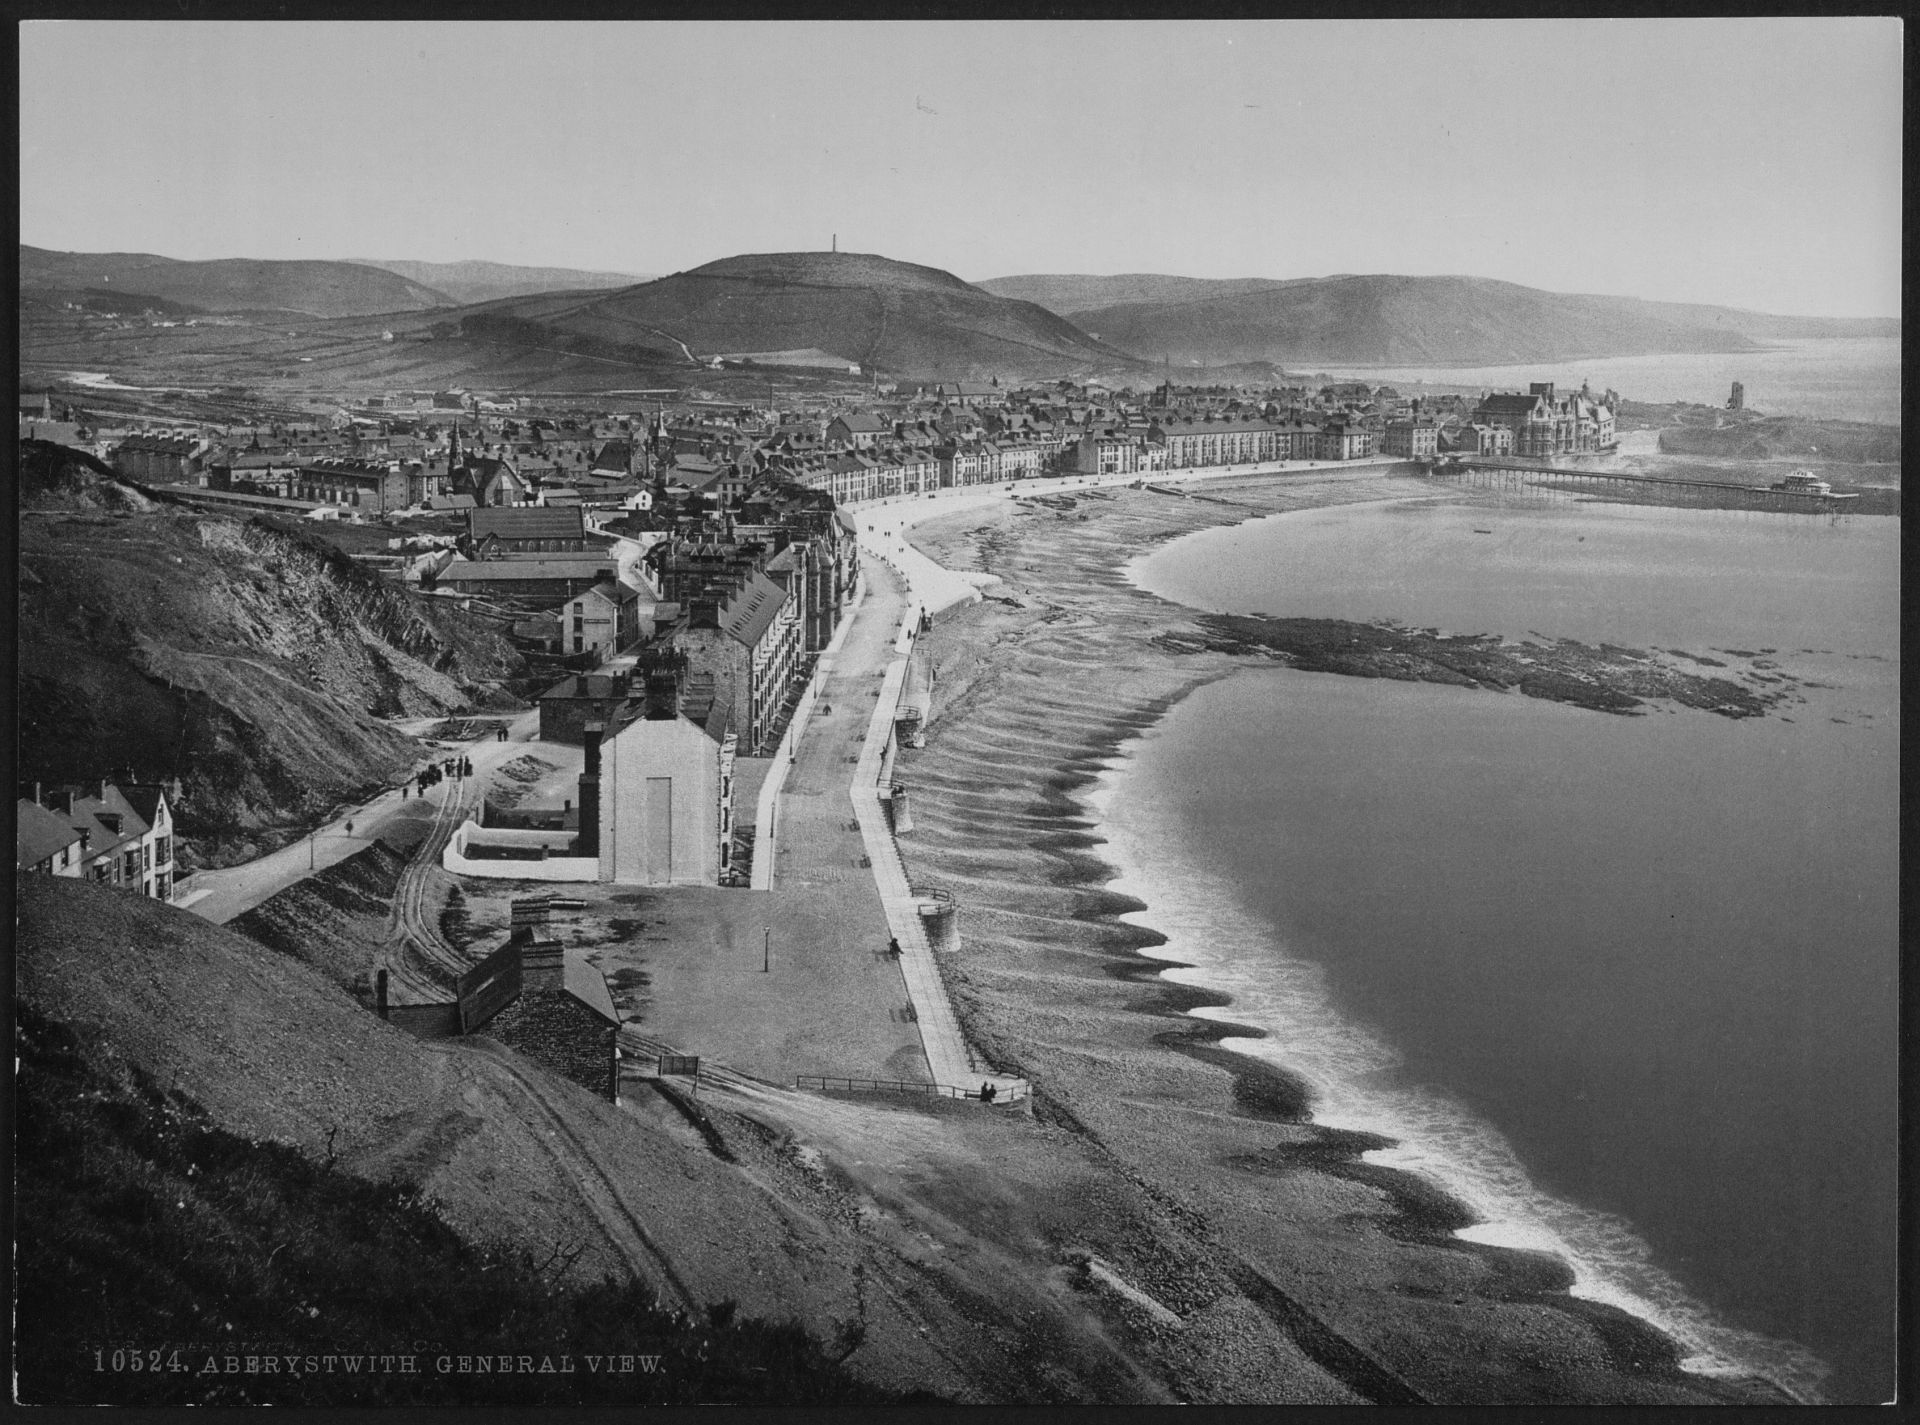 General view, Aberystwith, Wales